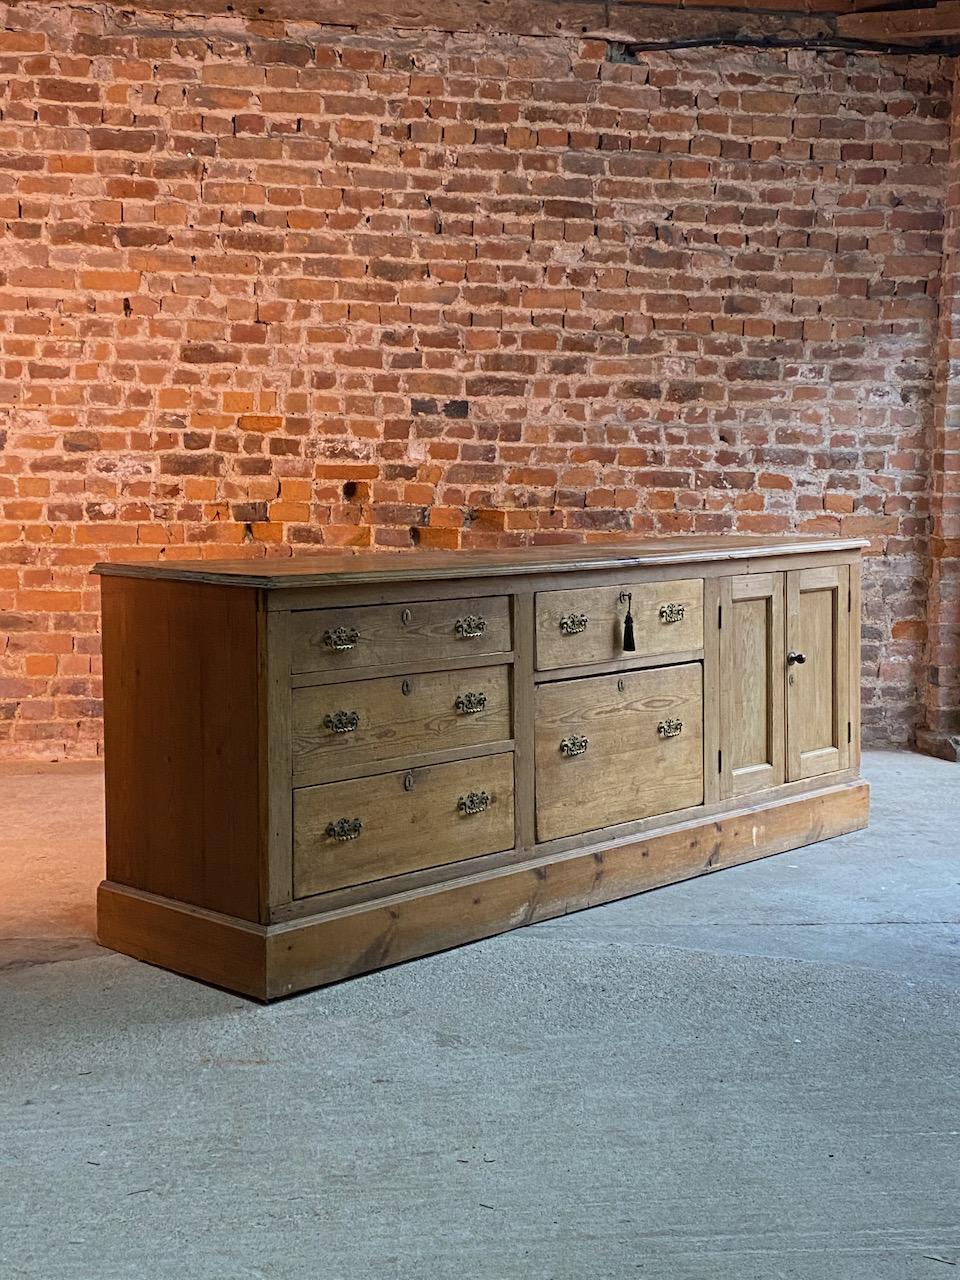 Antique Country House pine dresser sideboard 19th century, England, circa 1870

A substantial large and imposing antique English ‘Country House’ stripped pine kitchen dresser 19th century England Victorian era circa 1870, perfect to use in a